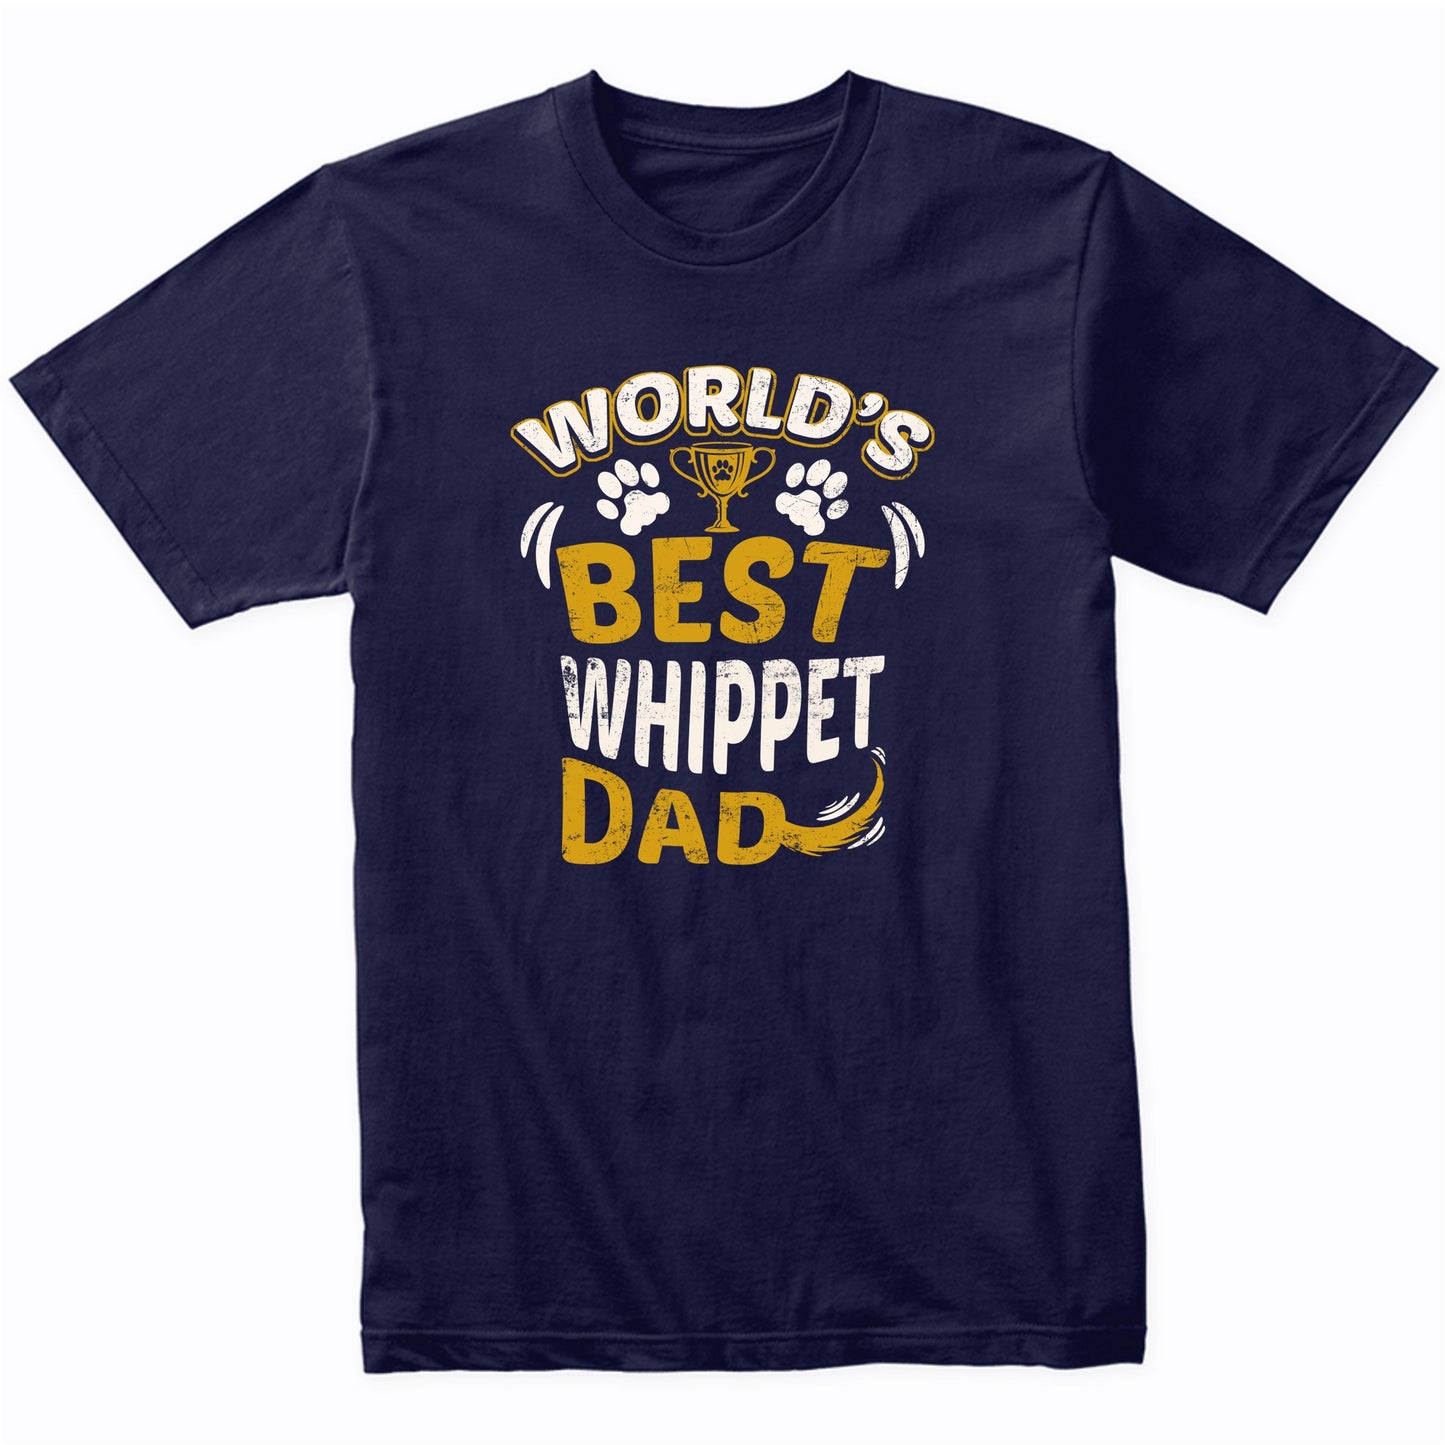 World's Best Whippet Dad Graphic T-Shirt